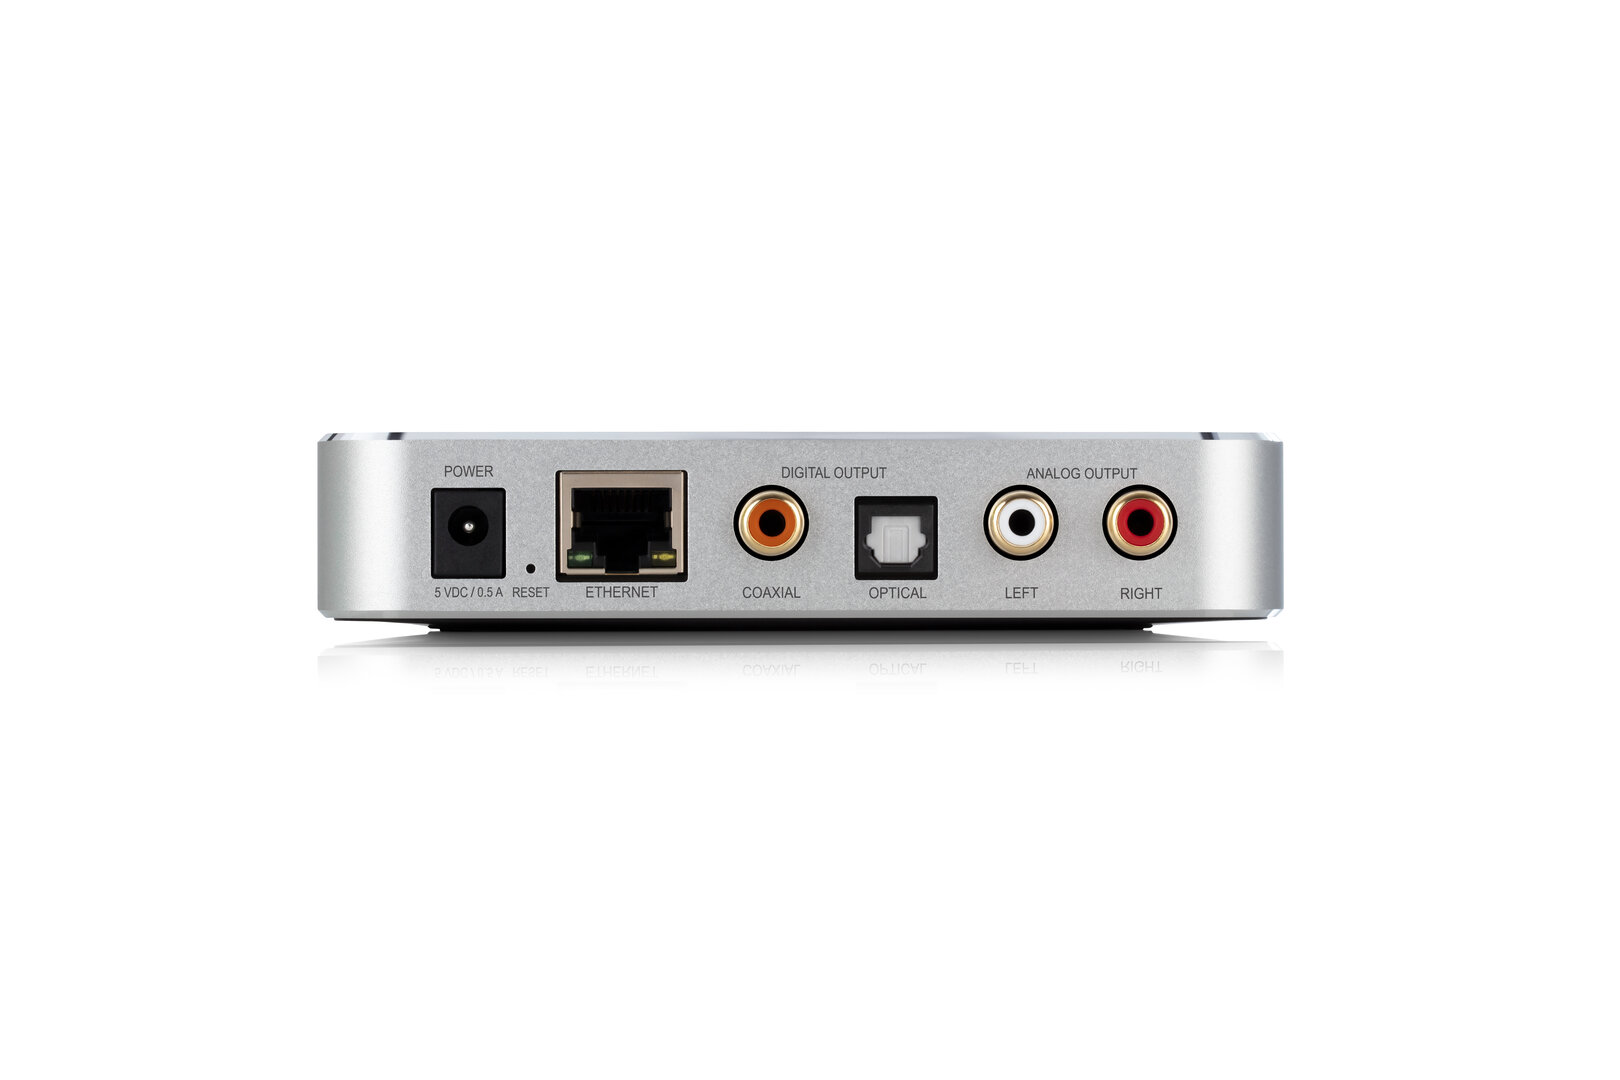 Eve Play - Audiostreaming Musikstreaming HiFi Adapter für AirPlay  4260195392069